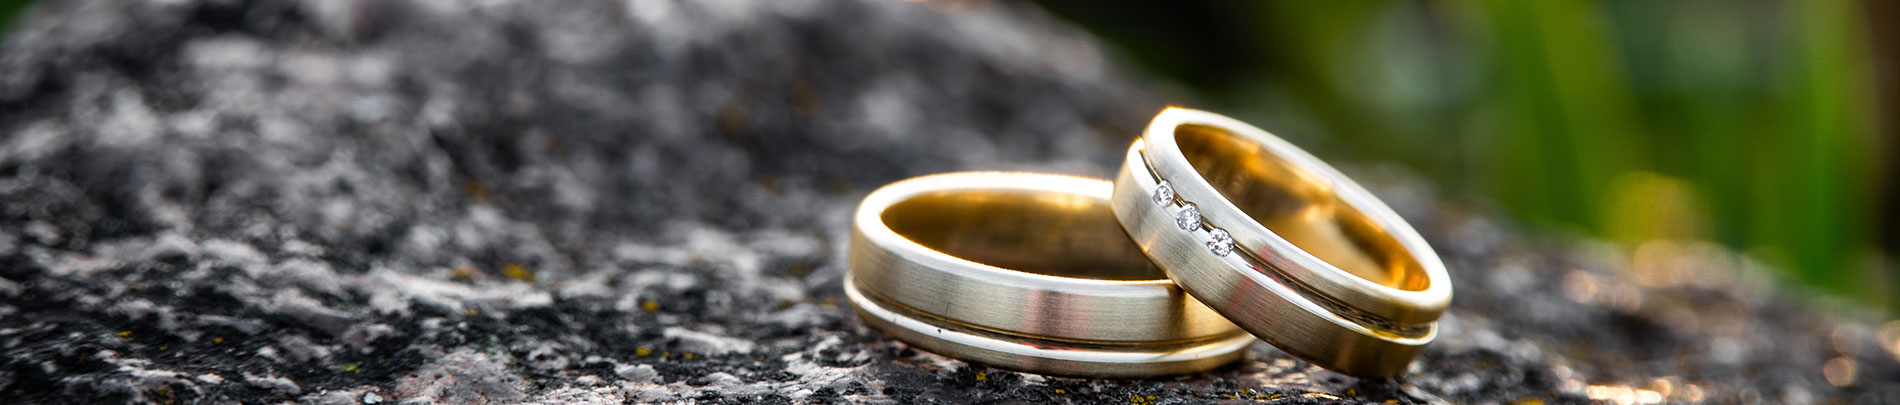 Wedding rings sit on a rock with green foliage in the background.